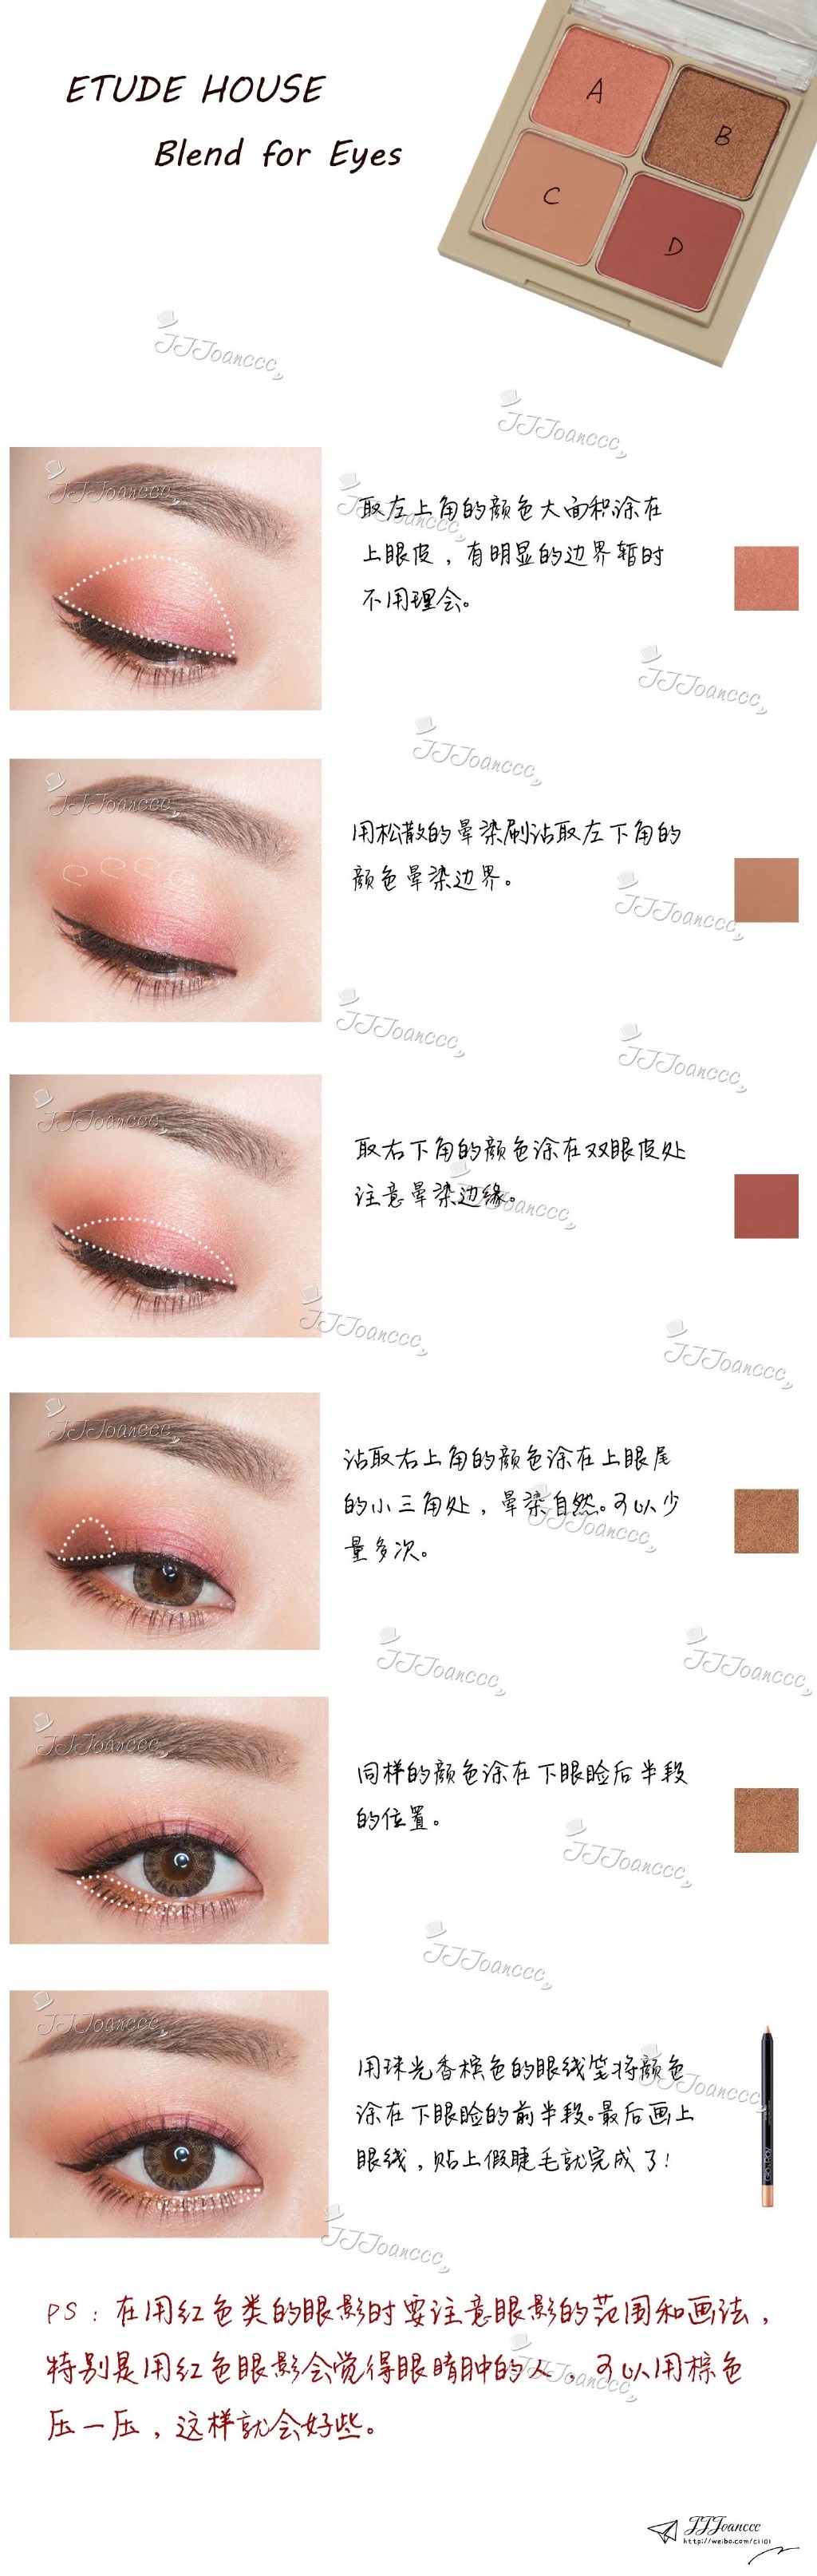 ETUDE HOUSE Blend for Eyes 爱丽小屋四色眼影01盘试色+画法